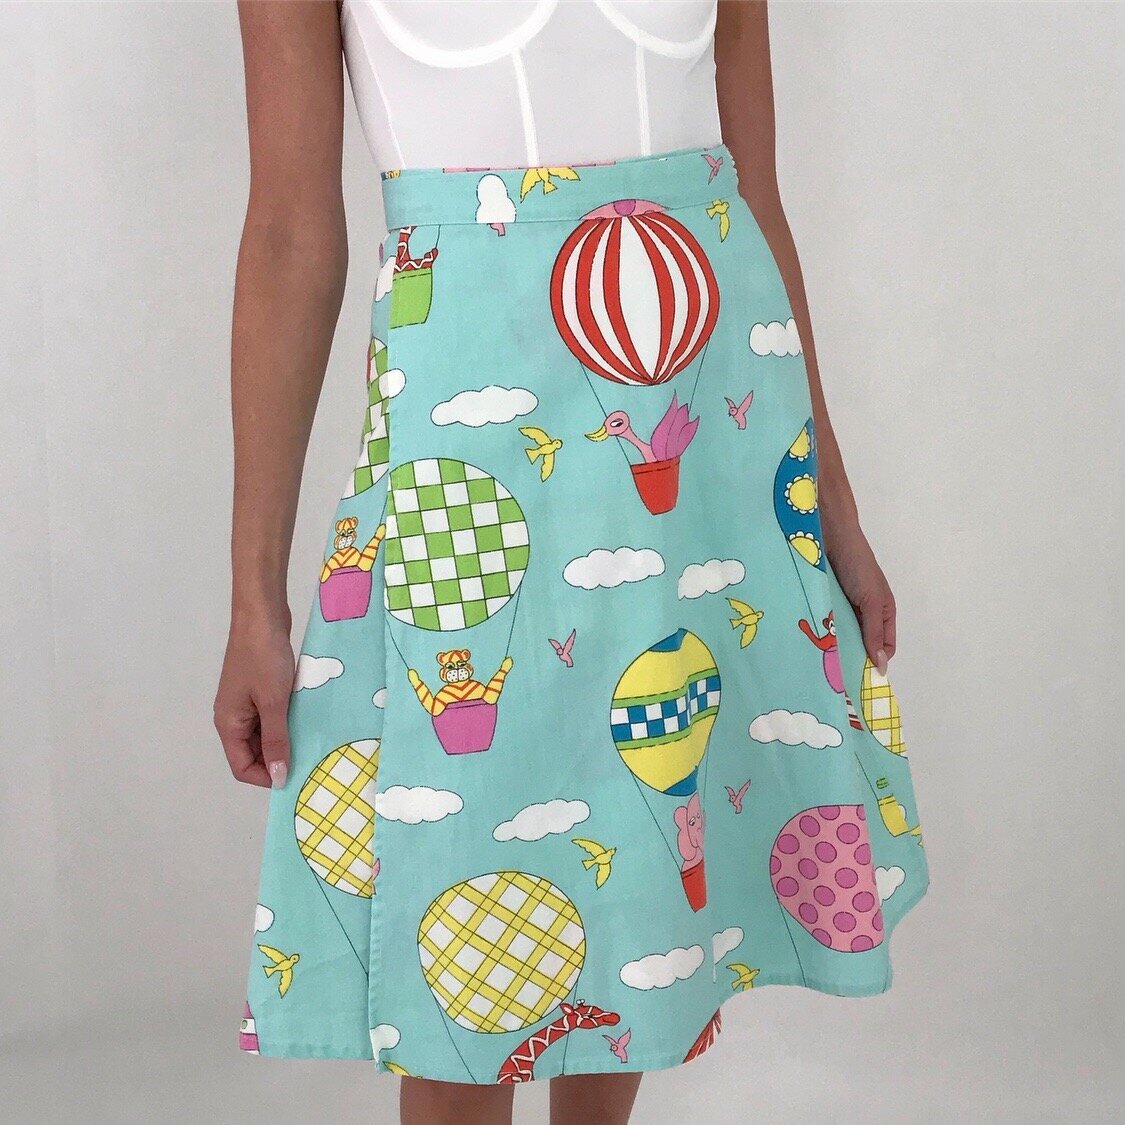 How To Make A Bubble Skirt with Free Printable Pattern